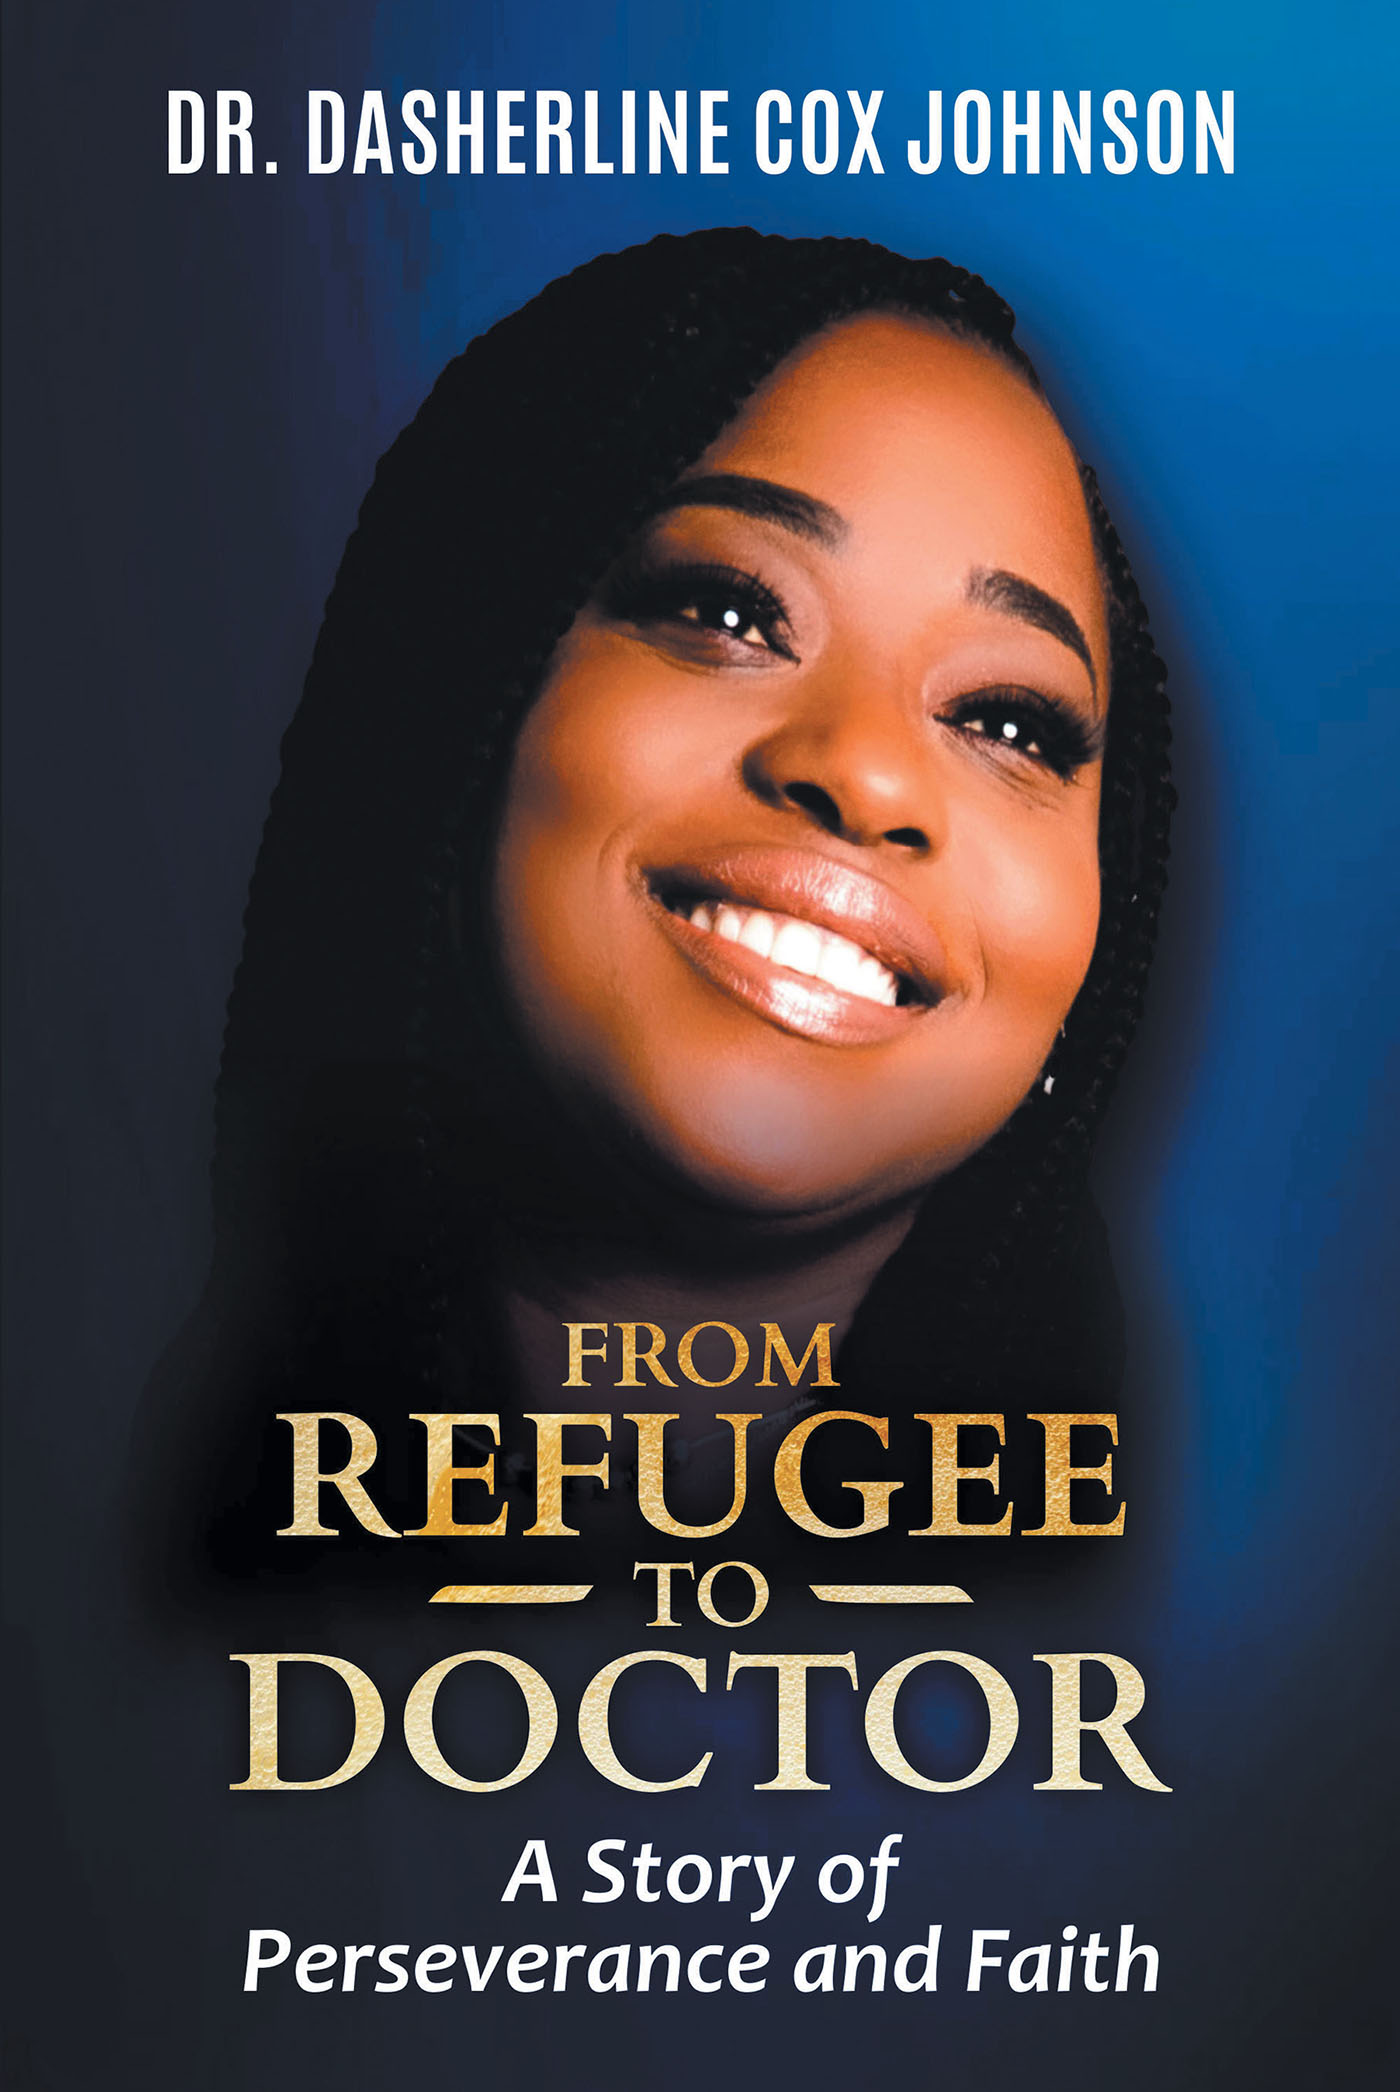 Author Dasherline Cox Johnson’s New Book, "From Refugee to Doctor," is a Stirring Account of the Author's Fight Against Incredible Odds to Find Her Way in Life